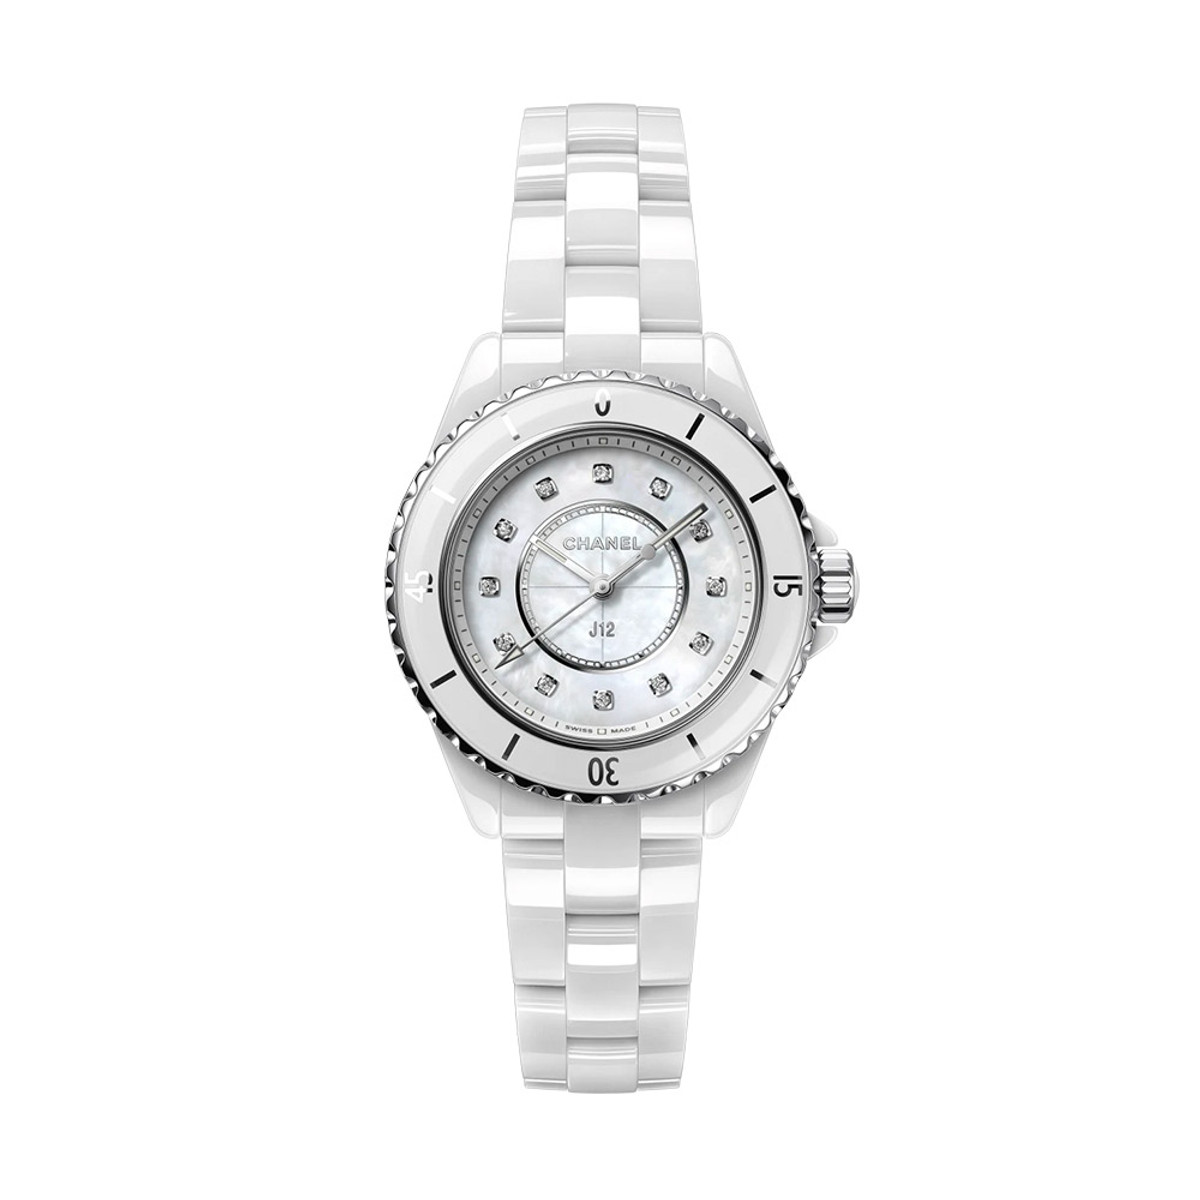 CHANEL J12 WATCH, 33 MM-40341 Product Image